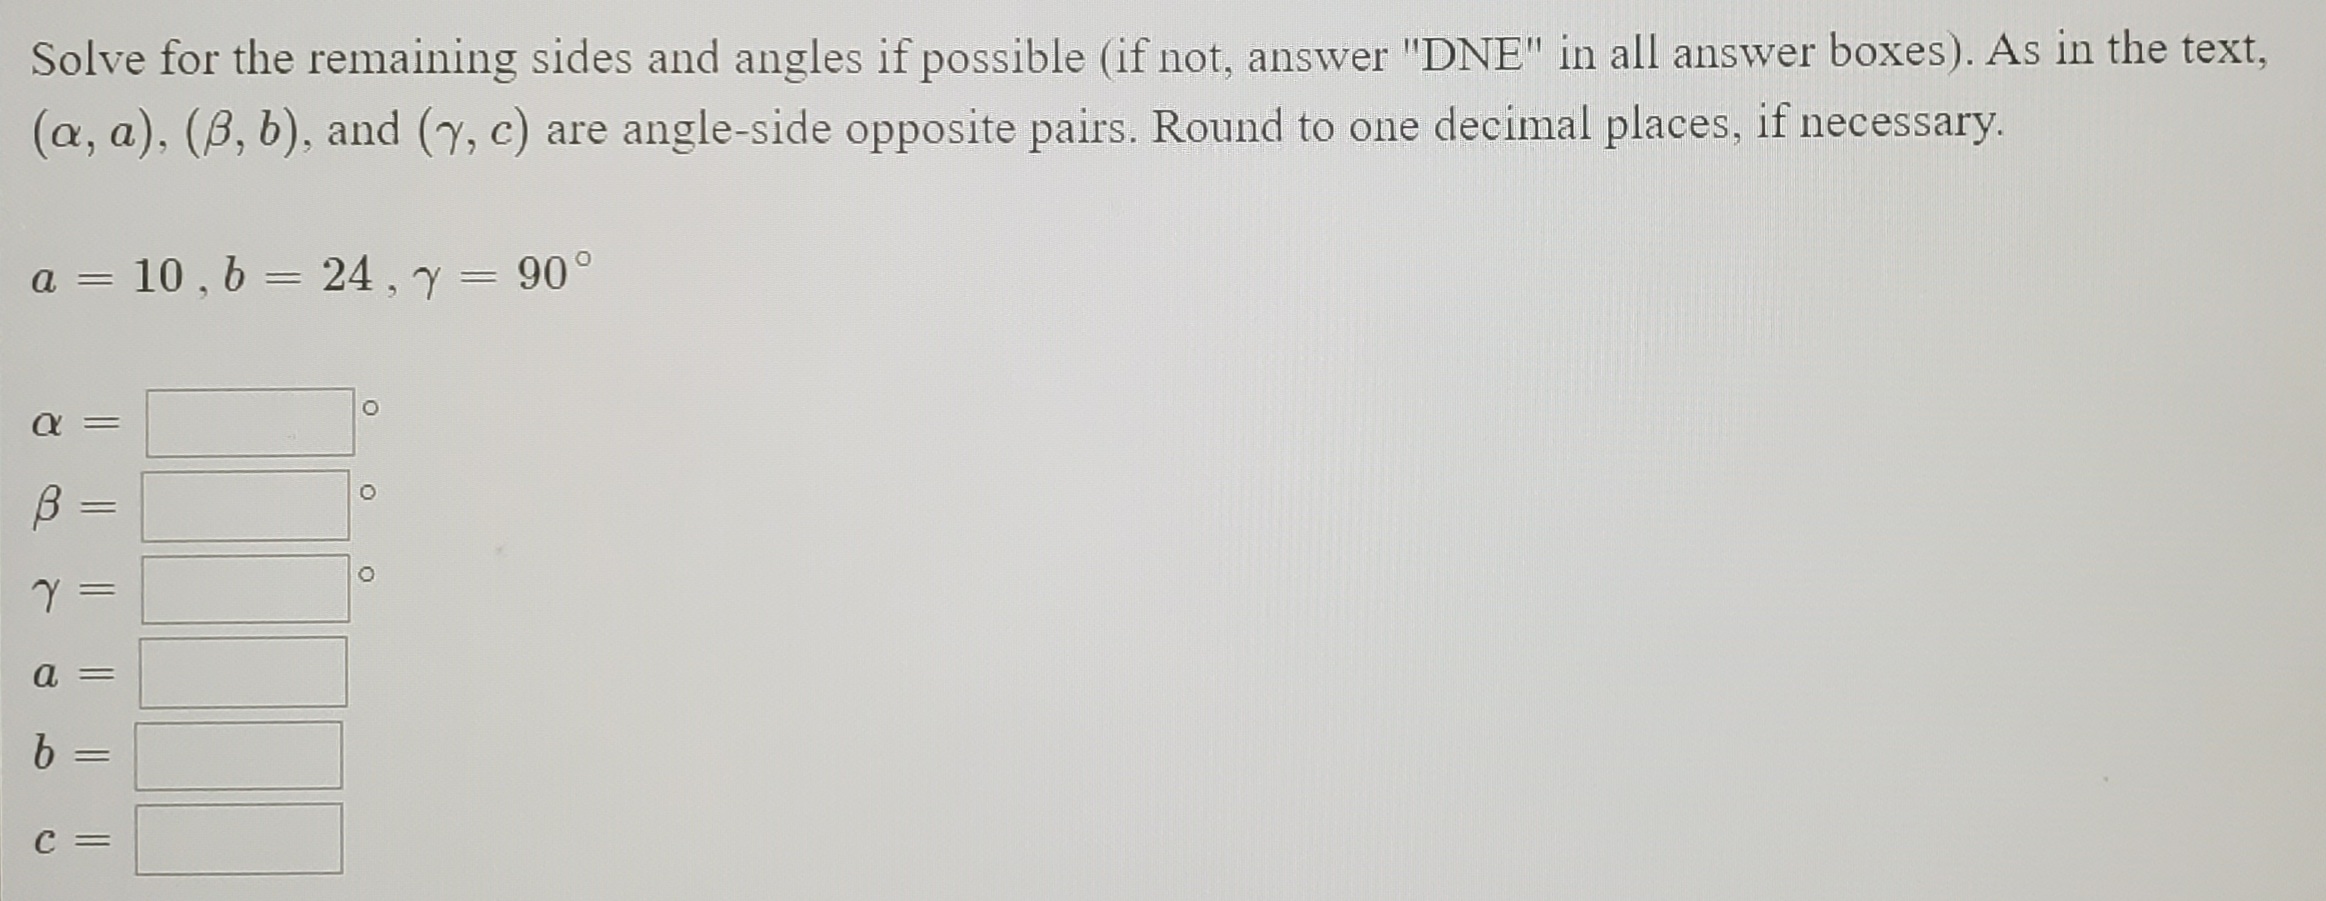 Solve for the remaining sides and angles if possible (if not, answer "DNE" in all answer boxes). As in the text,
(a, a), (B, b), and (y, c) are angle-side opposite pairs. Round to one decimal places, if necessary.
a = 10 , 6 = 24 , y = 90°
%3D
||
